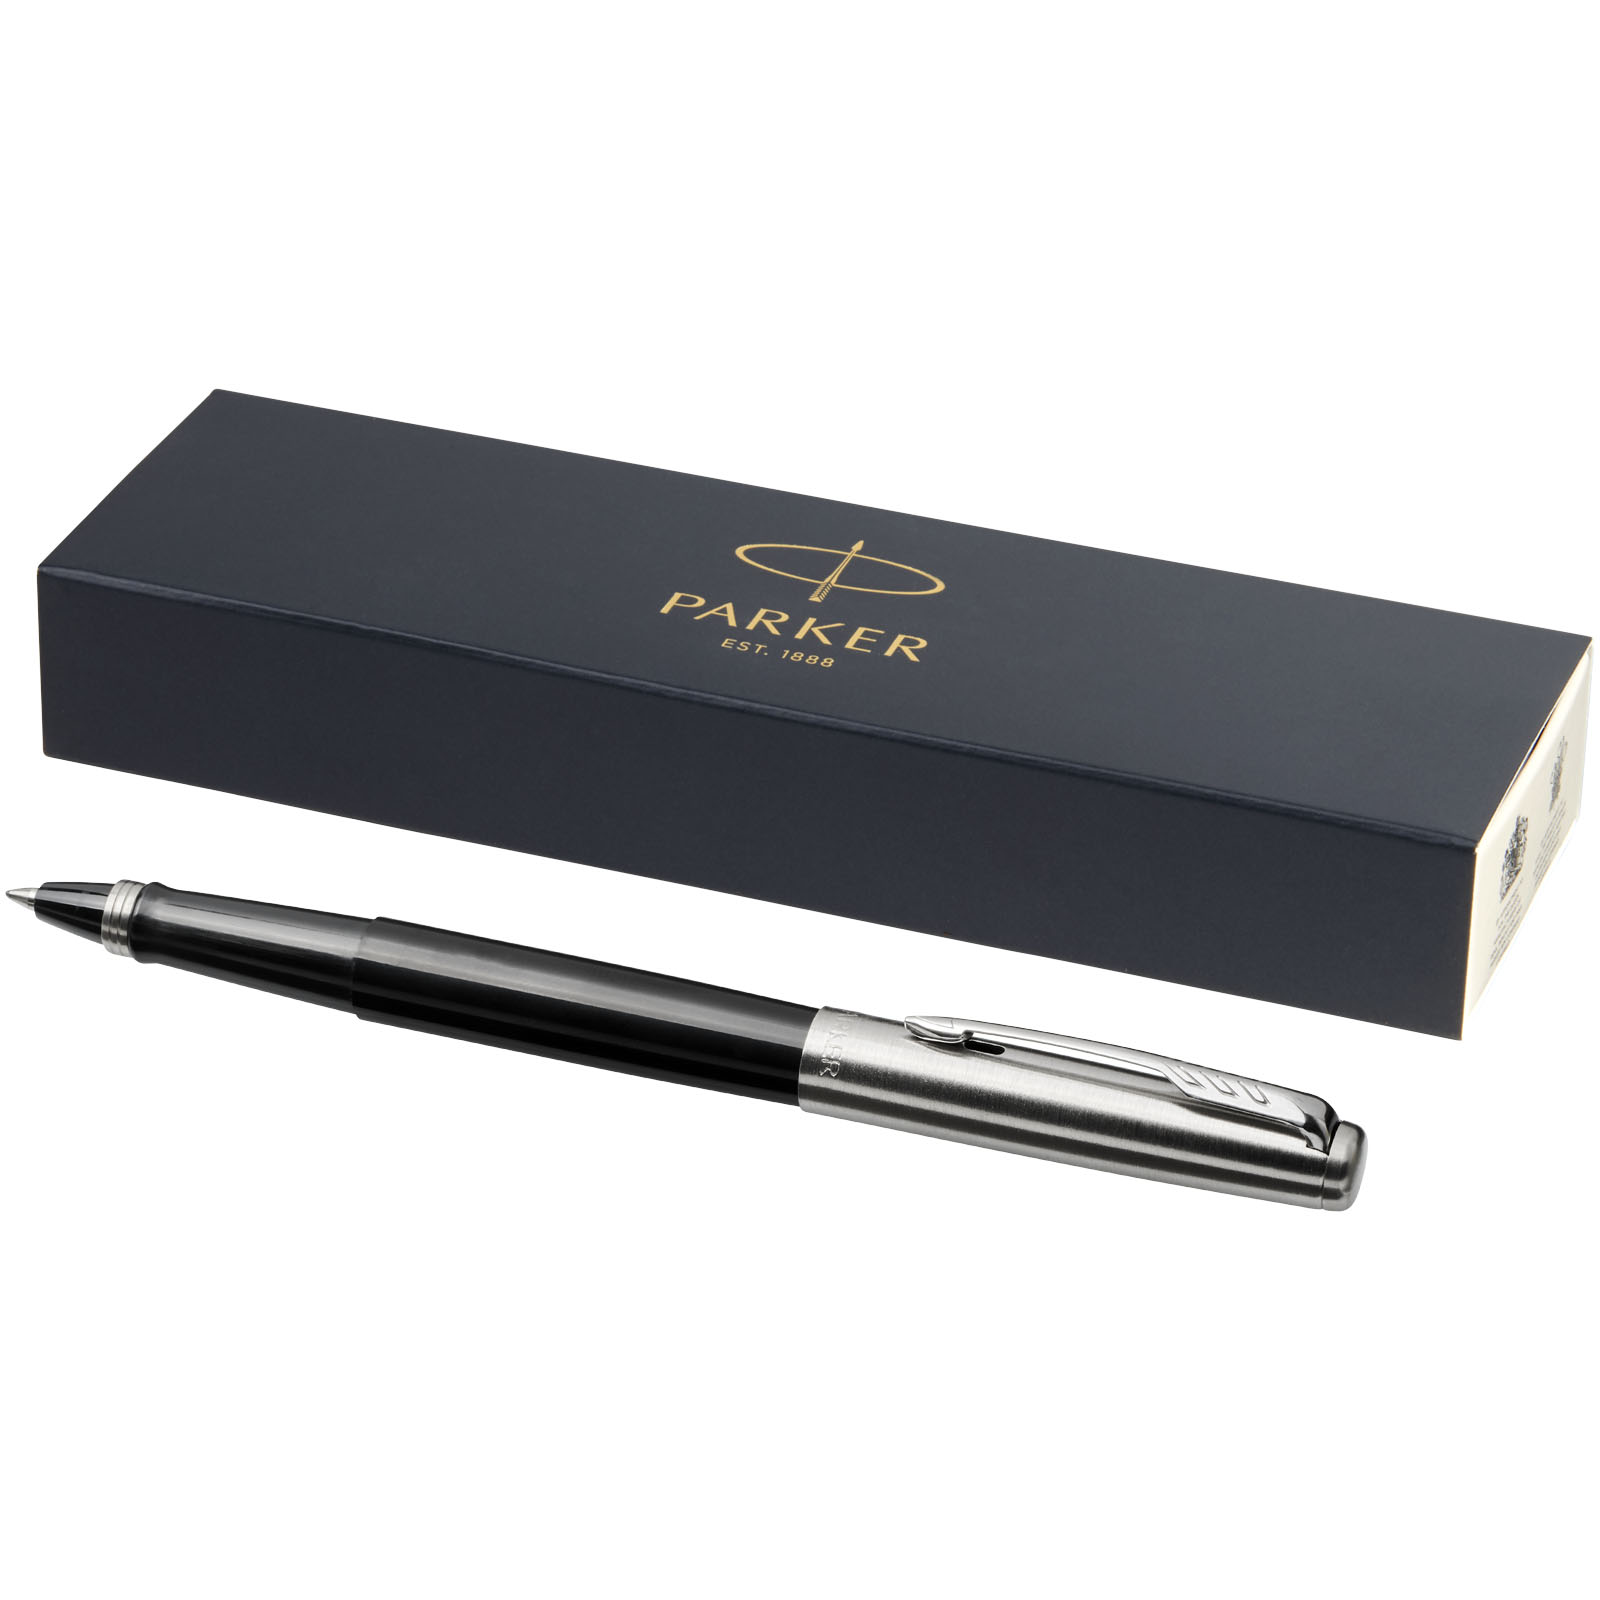 Pens & Writing - Parker Jotter plastic with stainless steel rollerball pen